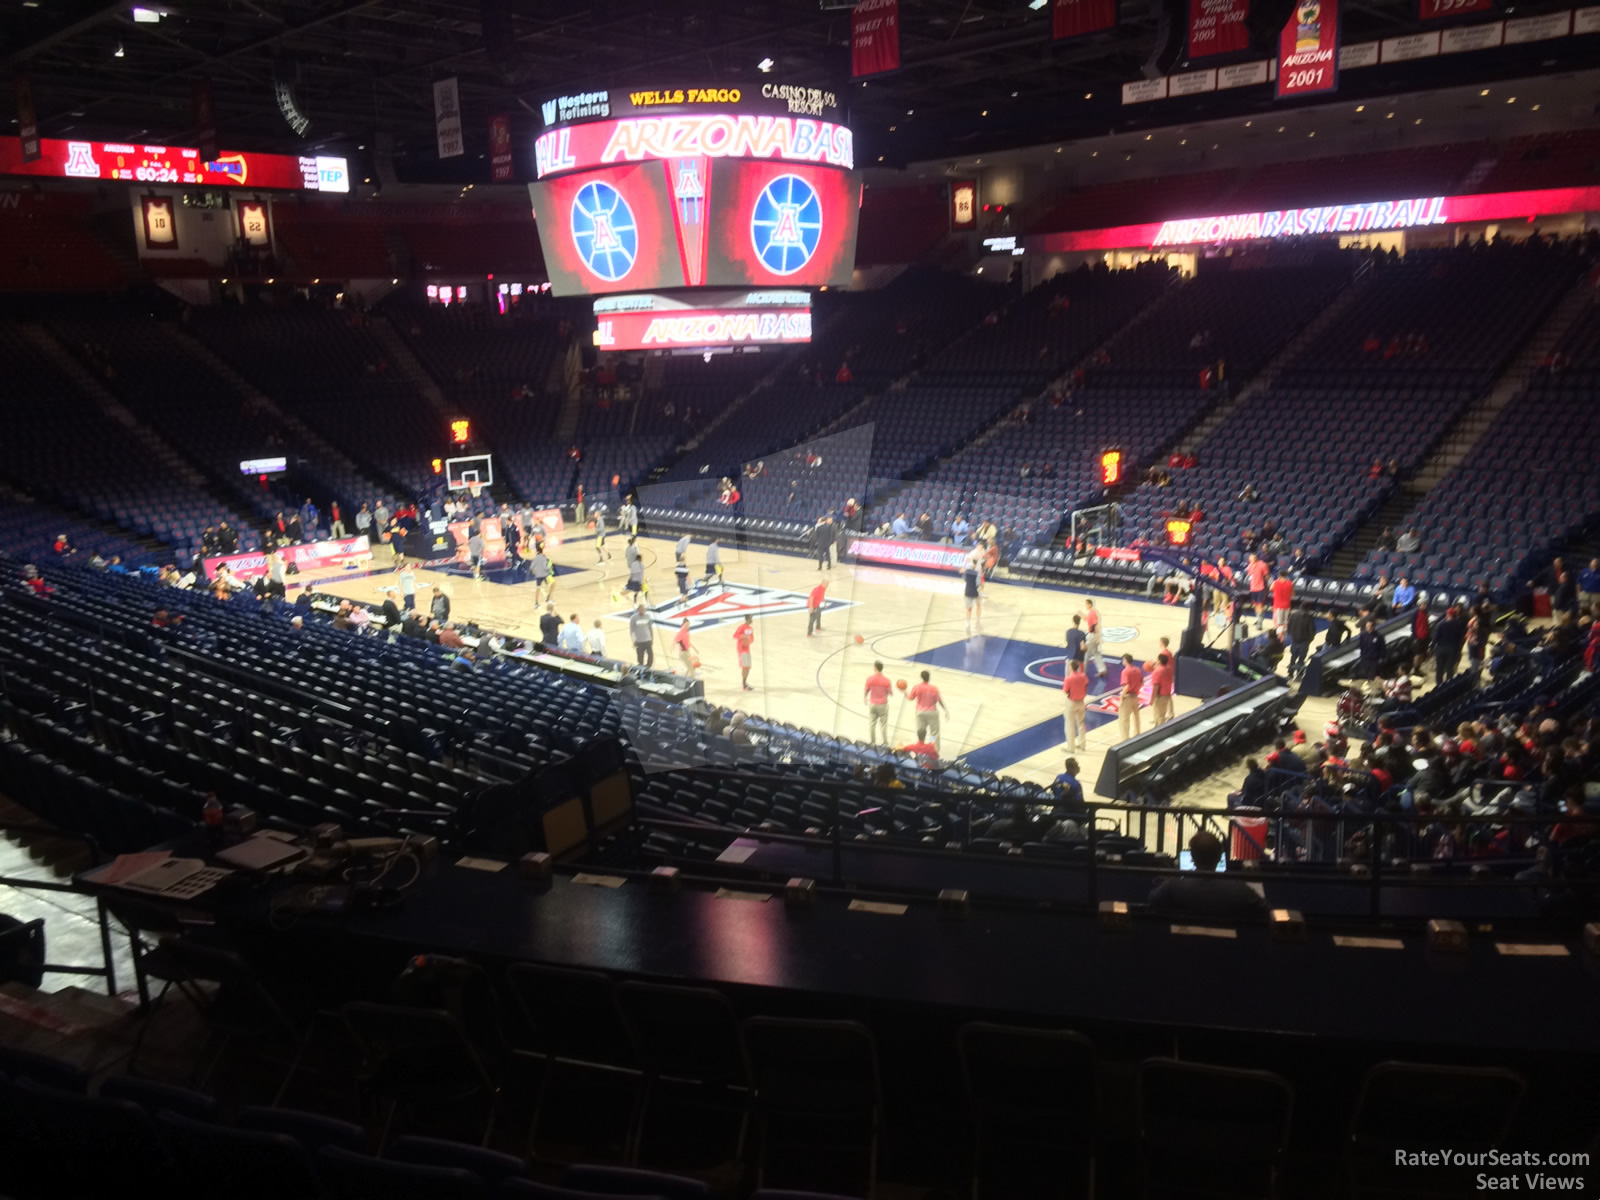 section 24, row 23 seat view  - mckale center